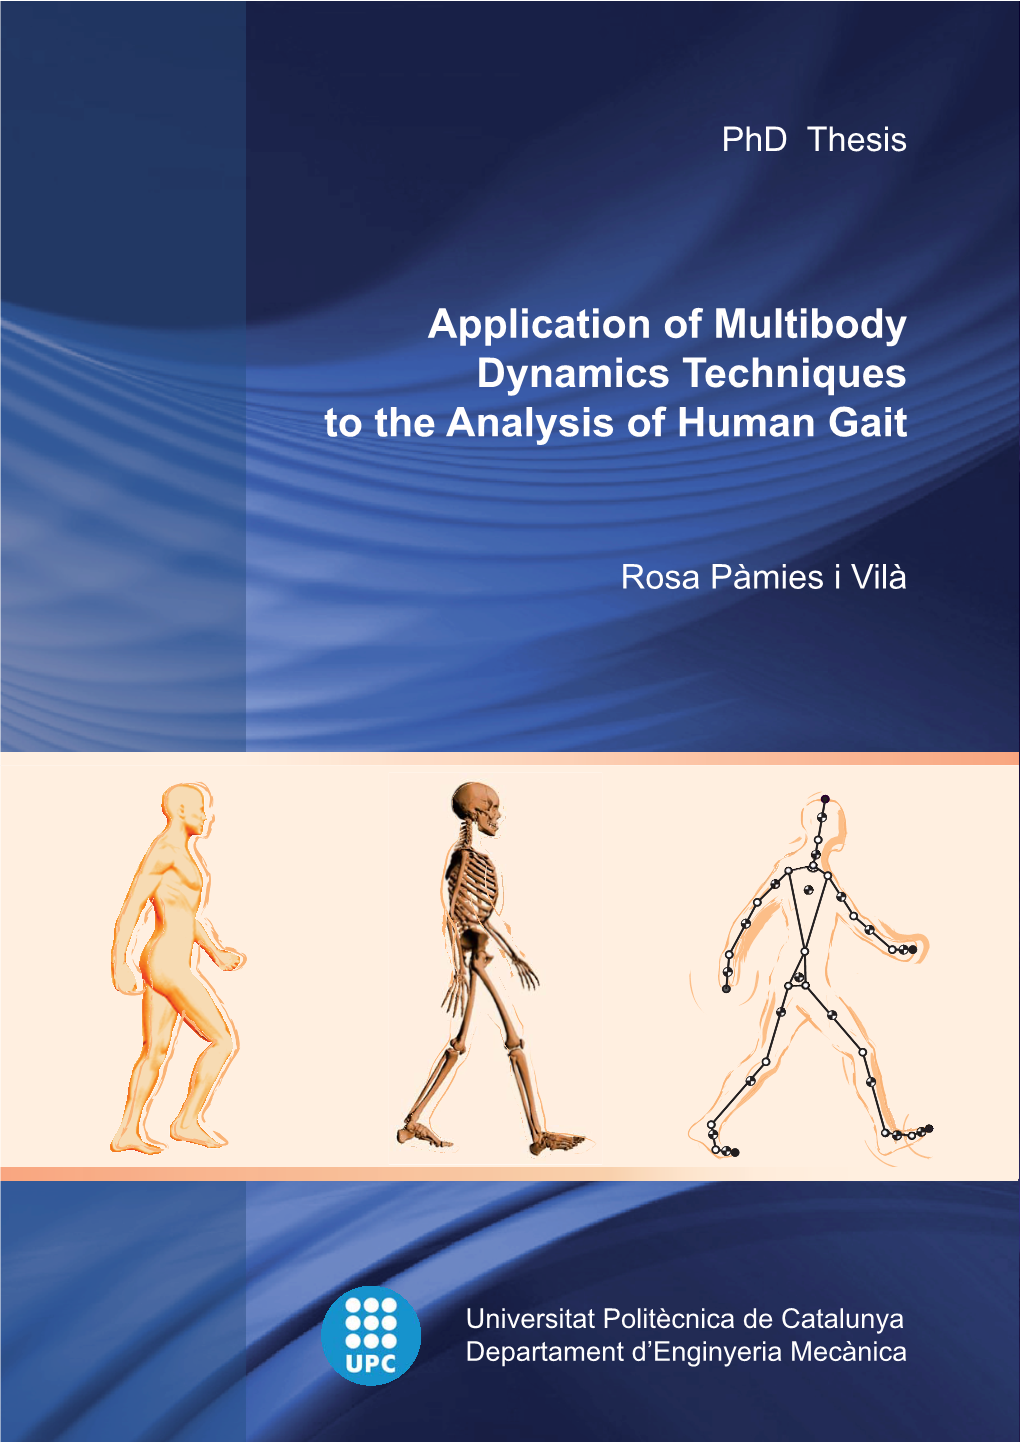 Application of Multibody Dynamics Techniques to the Analysis of Human Gait